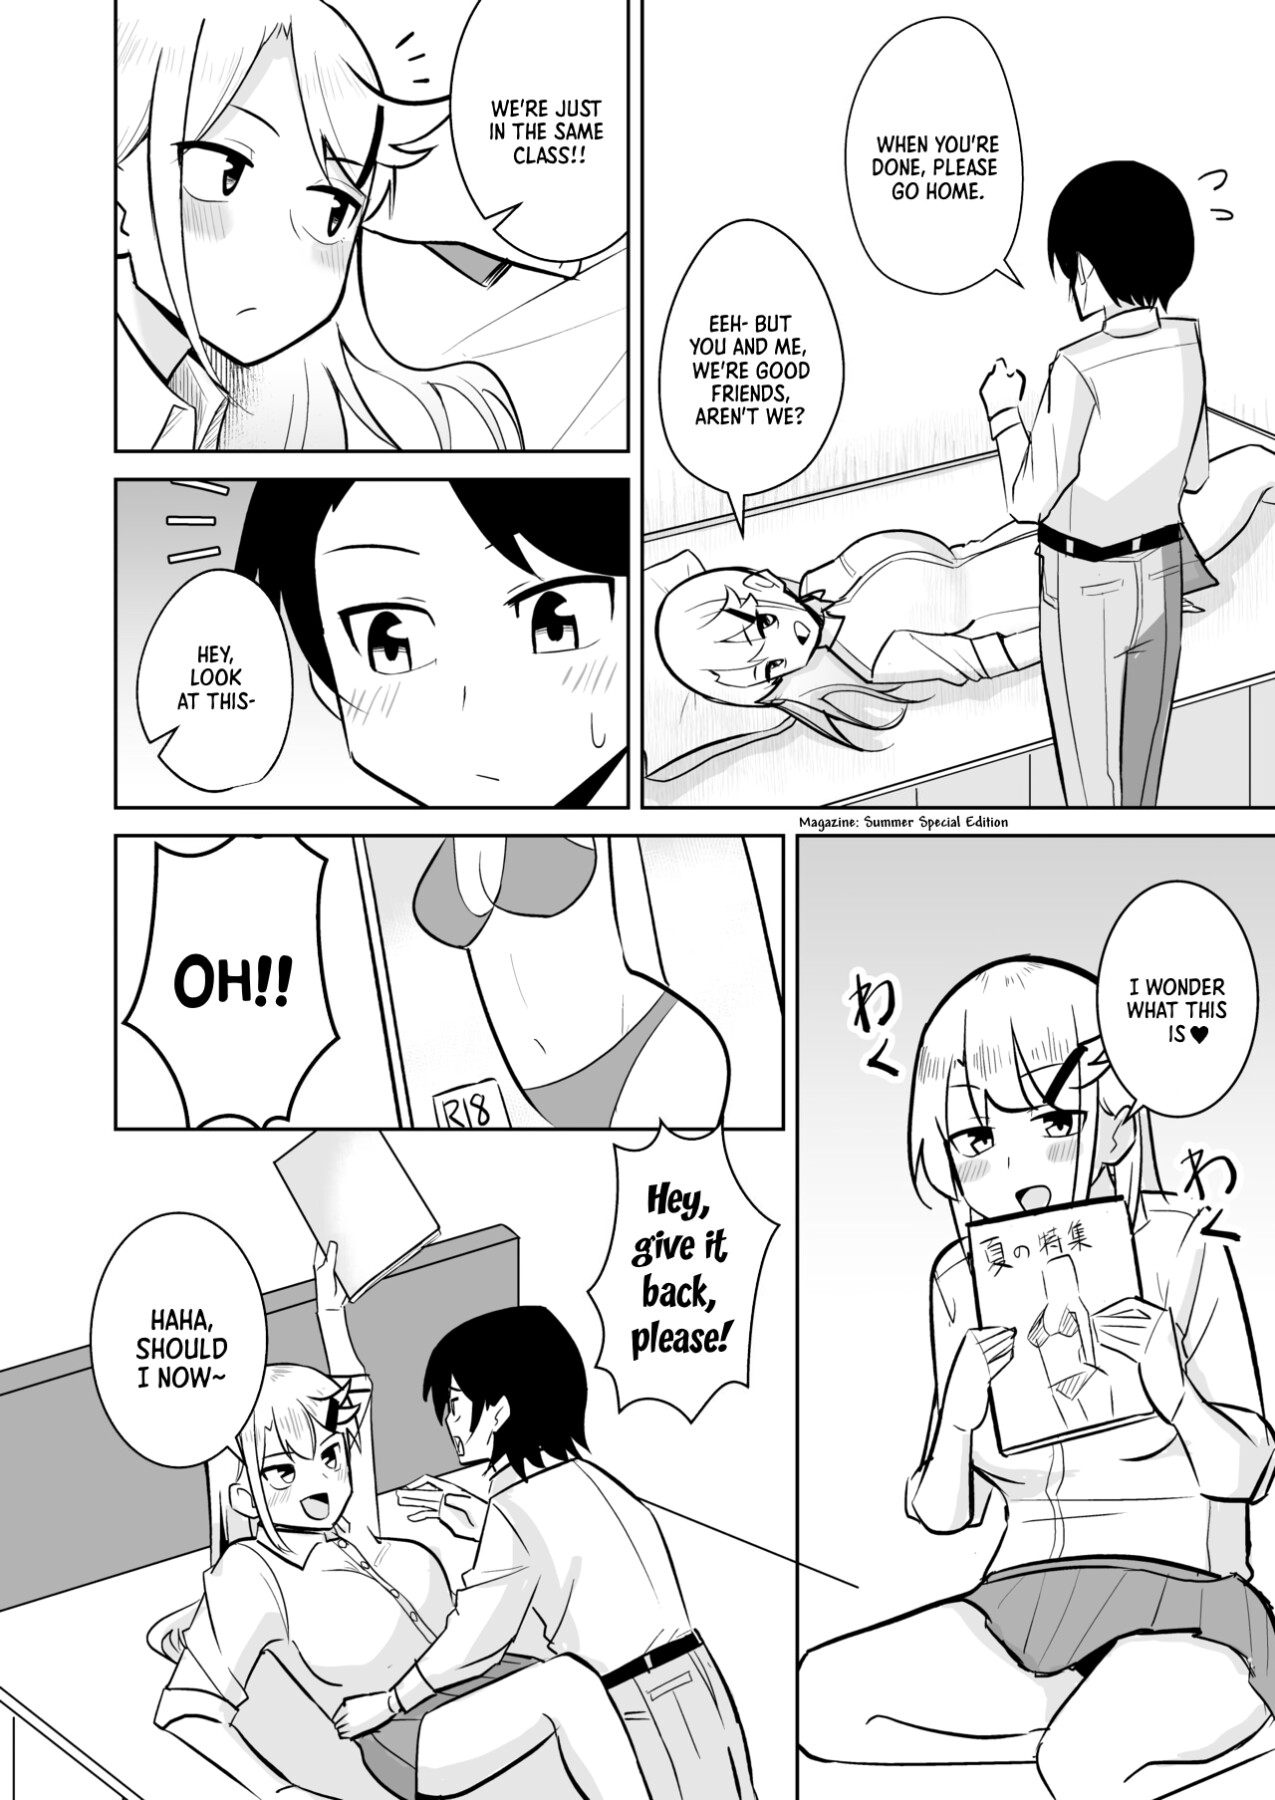 Hentai Manga Comic-A Story About a Gal coming To My House-Read-3